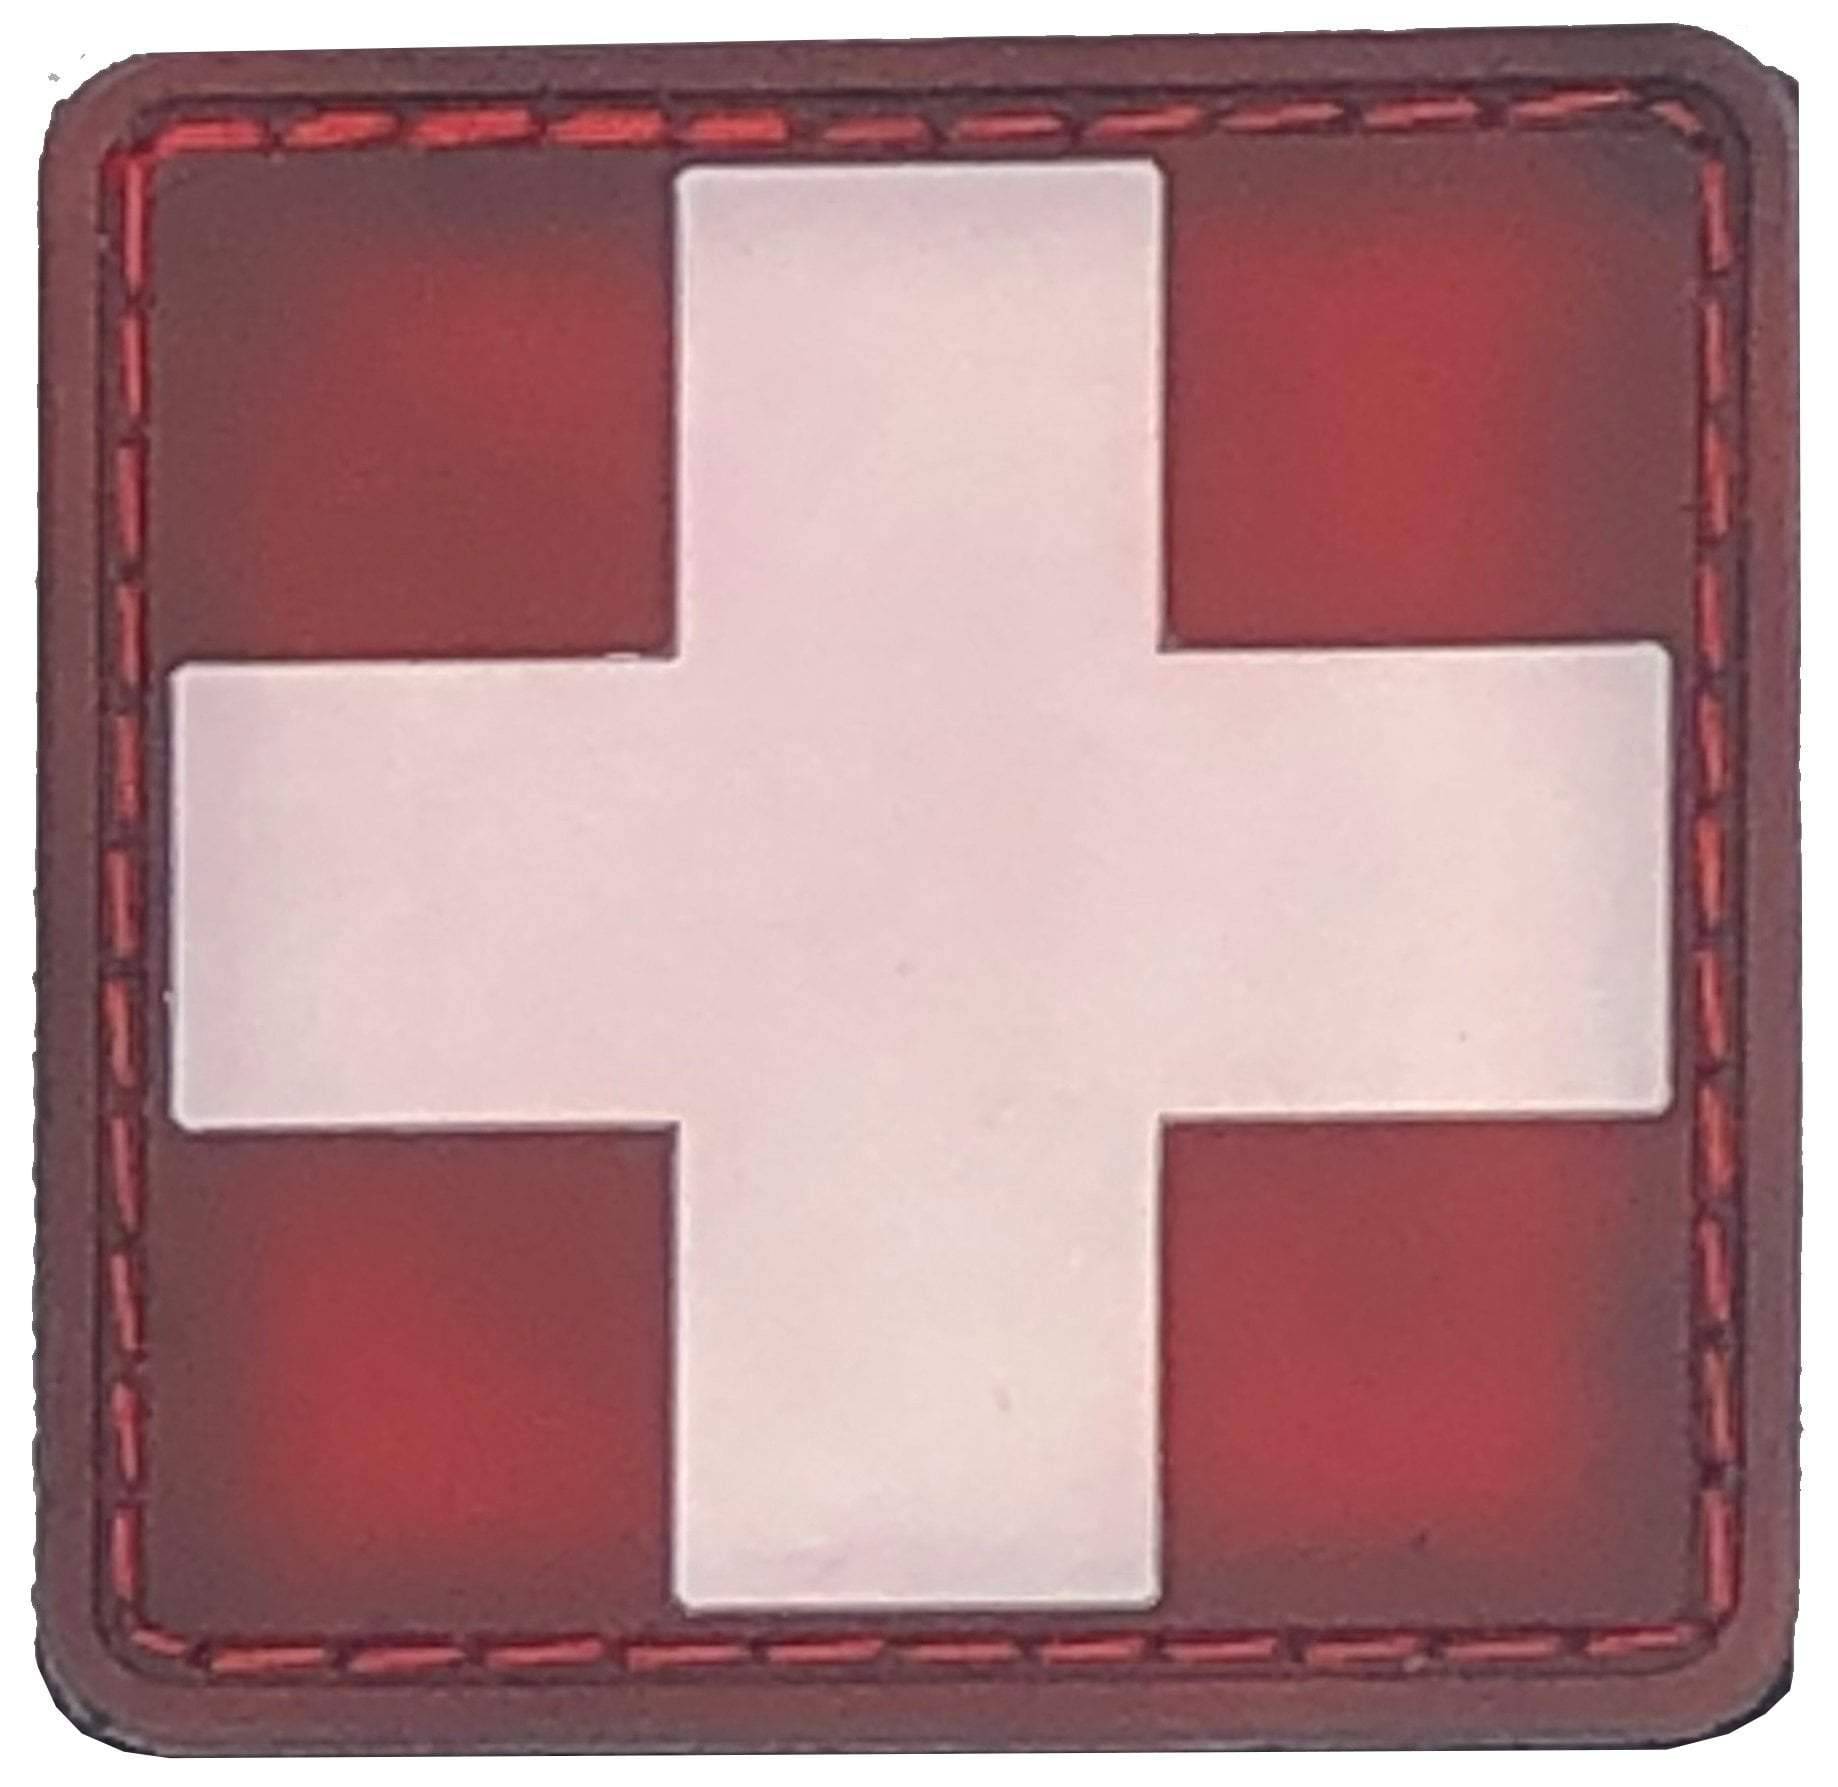 Red Crescent PVC Medical Patch